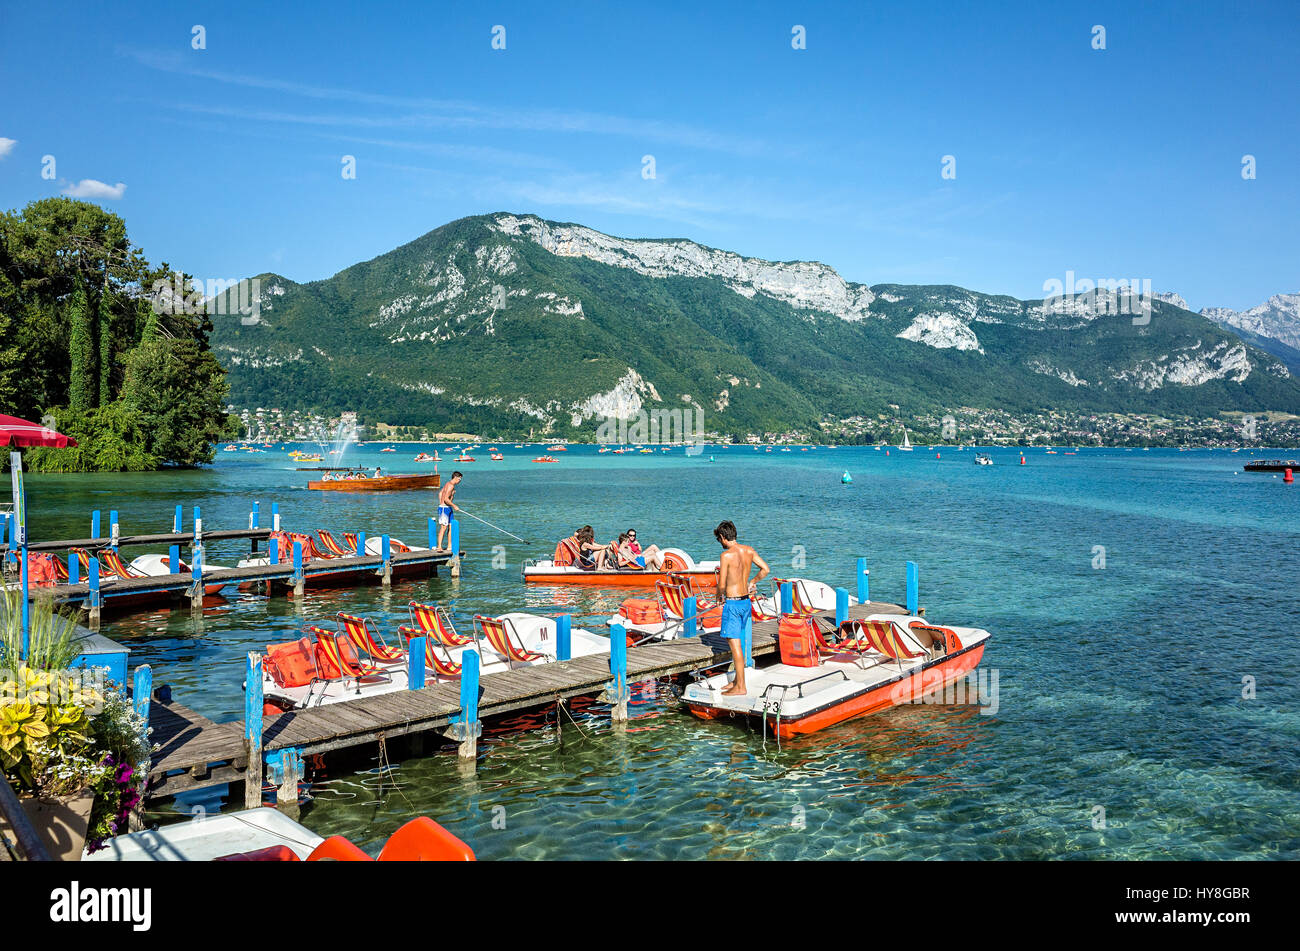 France, Haute savoie, Annecy, the lake. Stock Photo